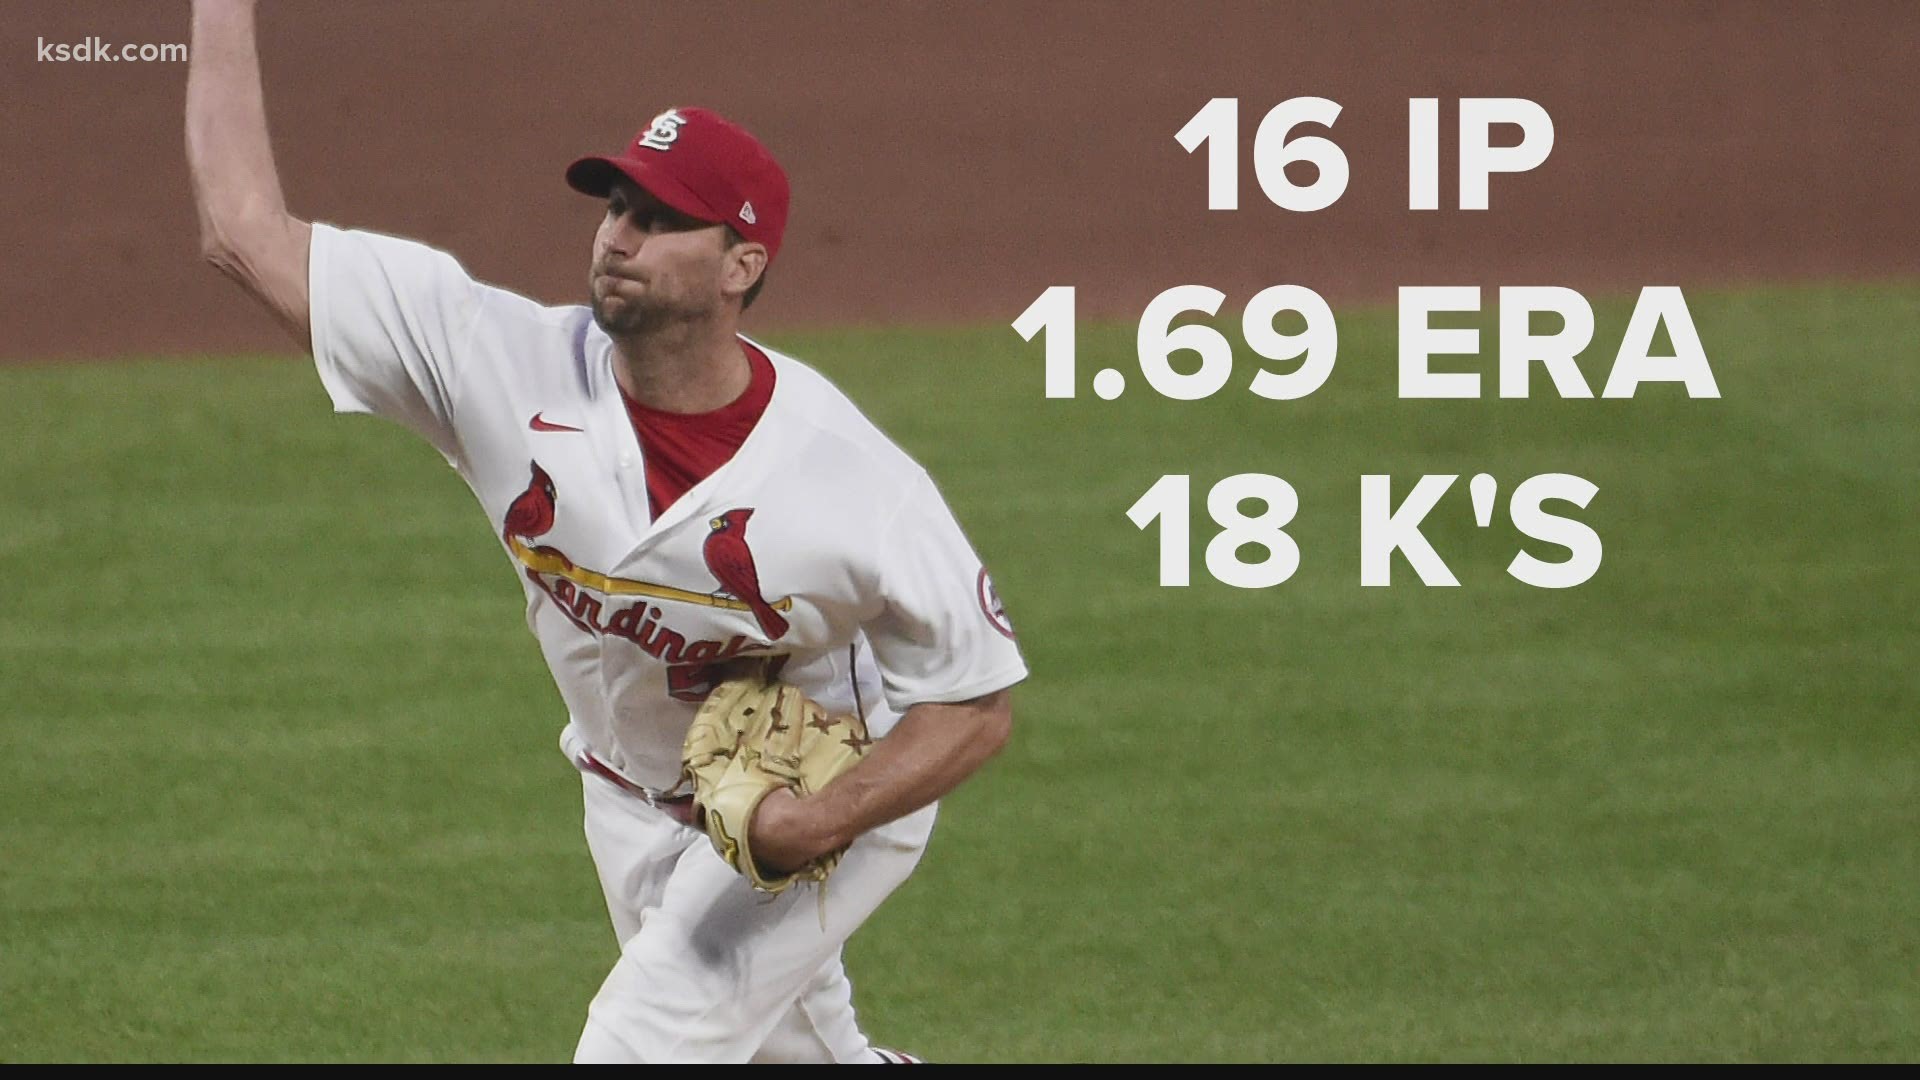 Every member of the Cardinals' staff has turned in an impressive outing or two in the past week.